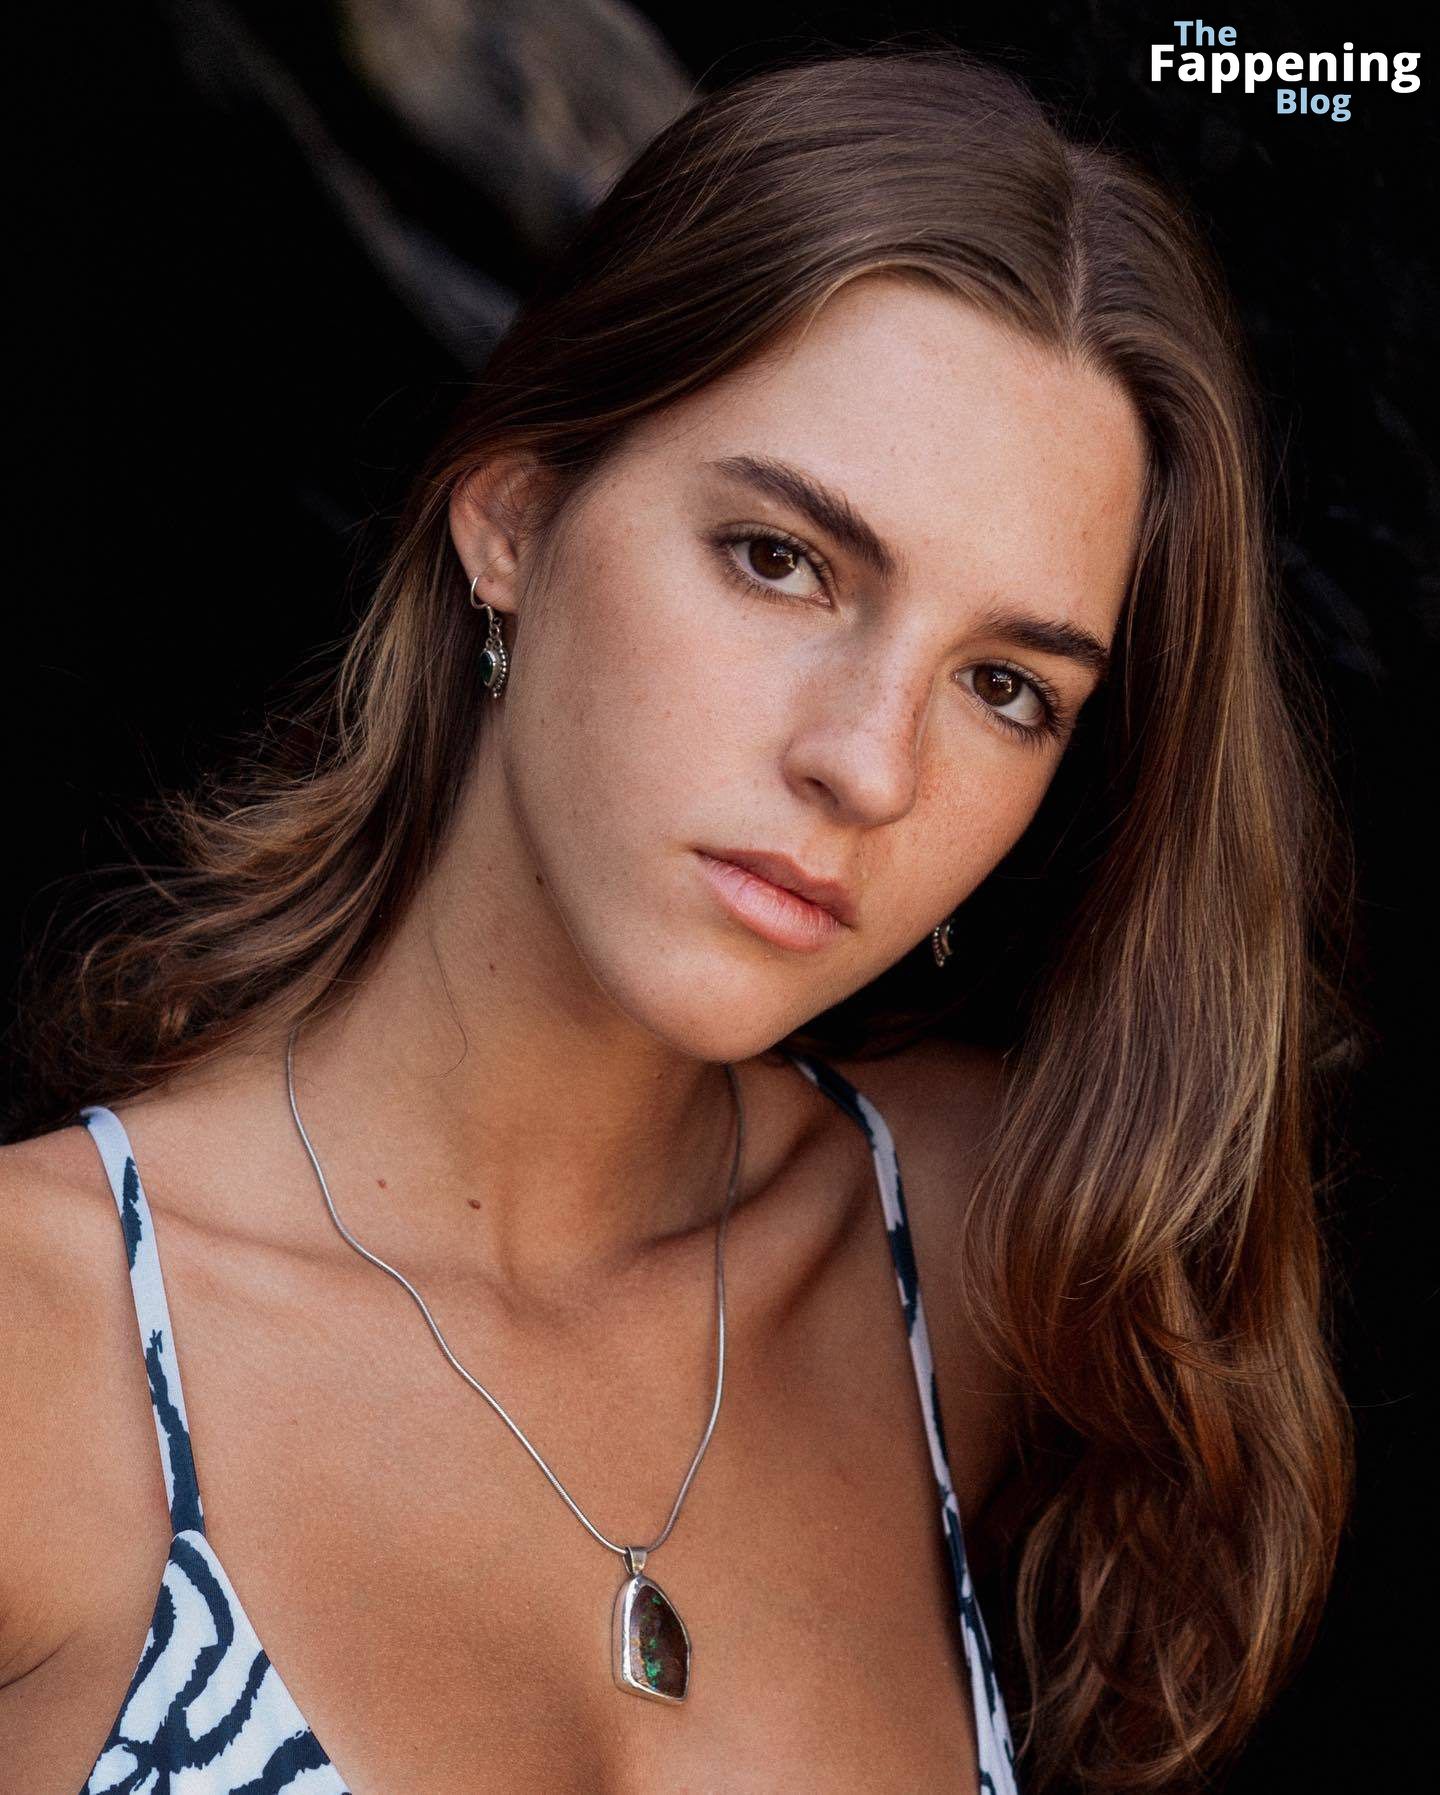 Emily Feld Displays Her Sexy Figure in a Bikini Shoot by Ethan Wright (20 Photos)